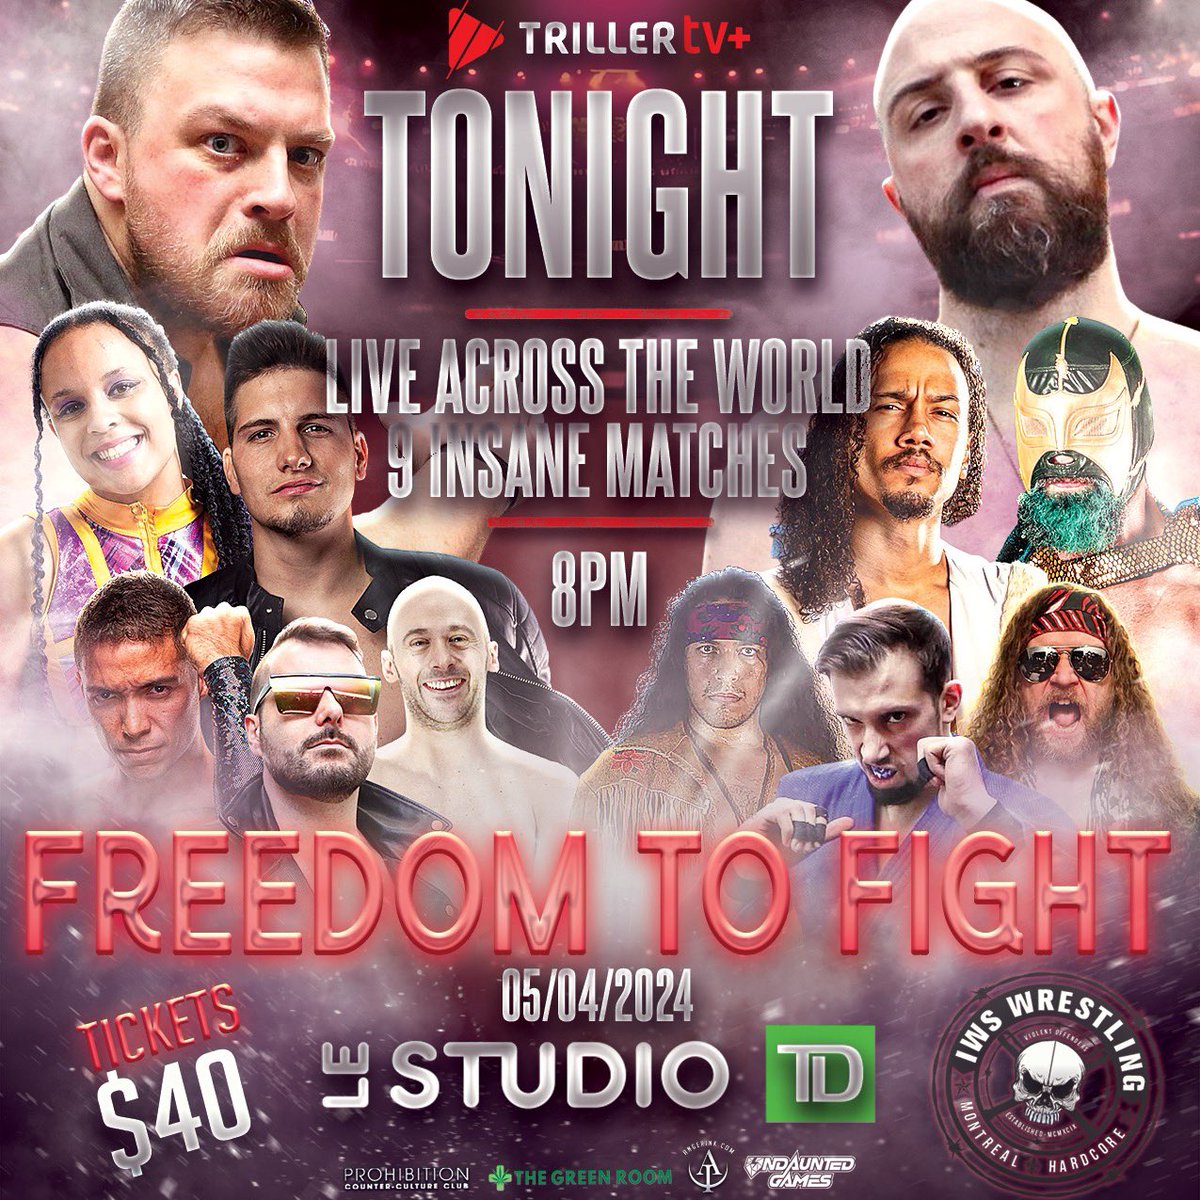 TONIGHT!!! CE SOIR!!! IWS FREEDOM TO FIGHT  5/4/24 - 40$ - Tous ages/All ages  🎟️: linktr.ee/iwshardcore